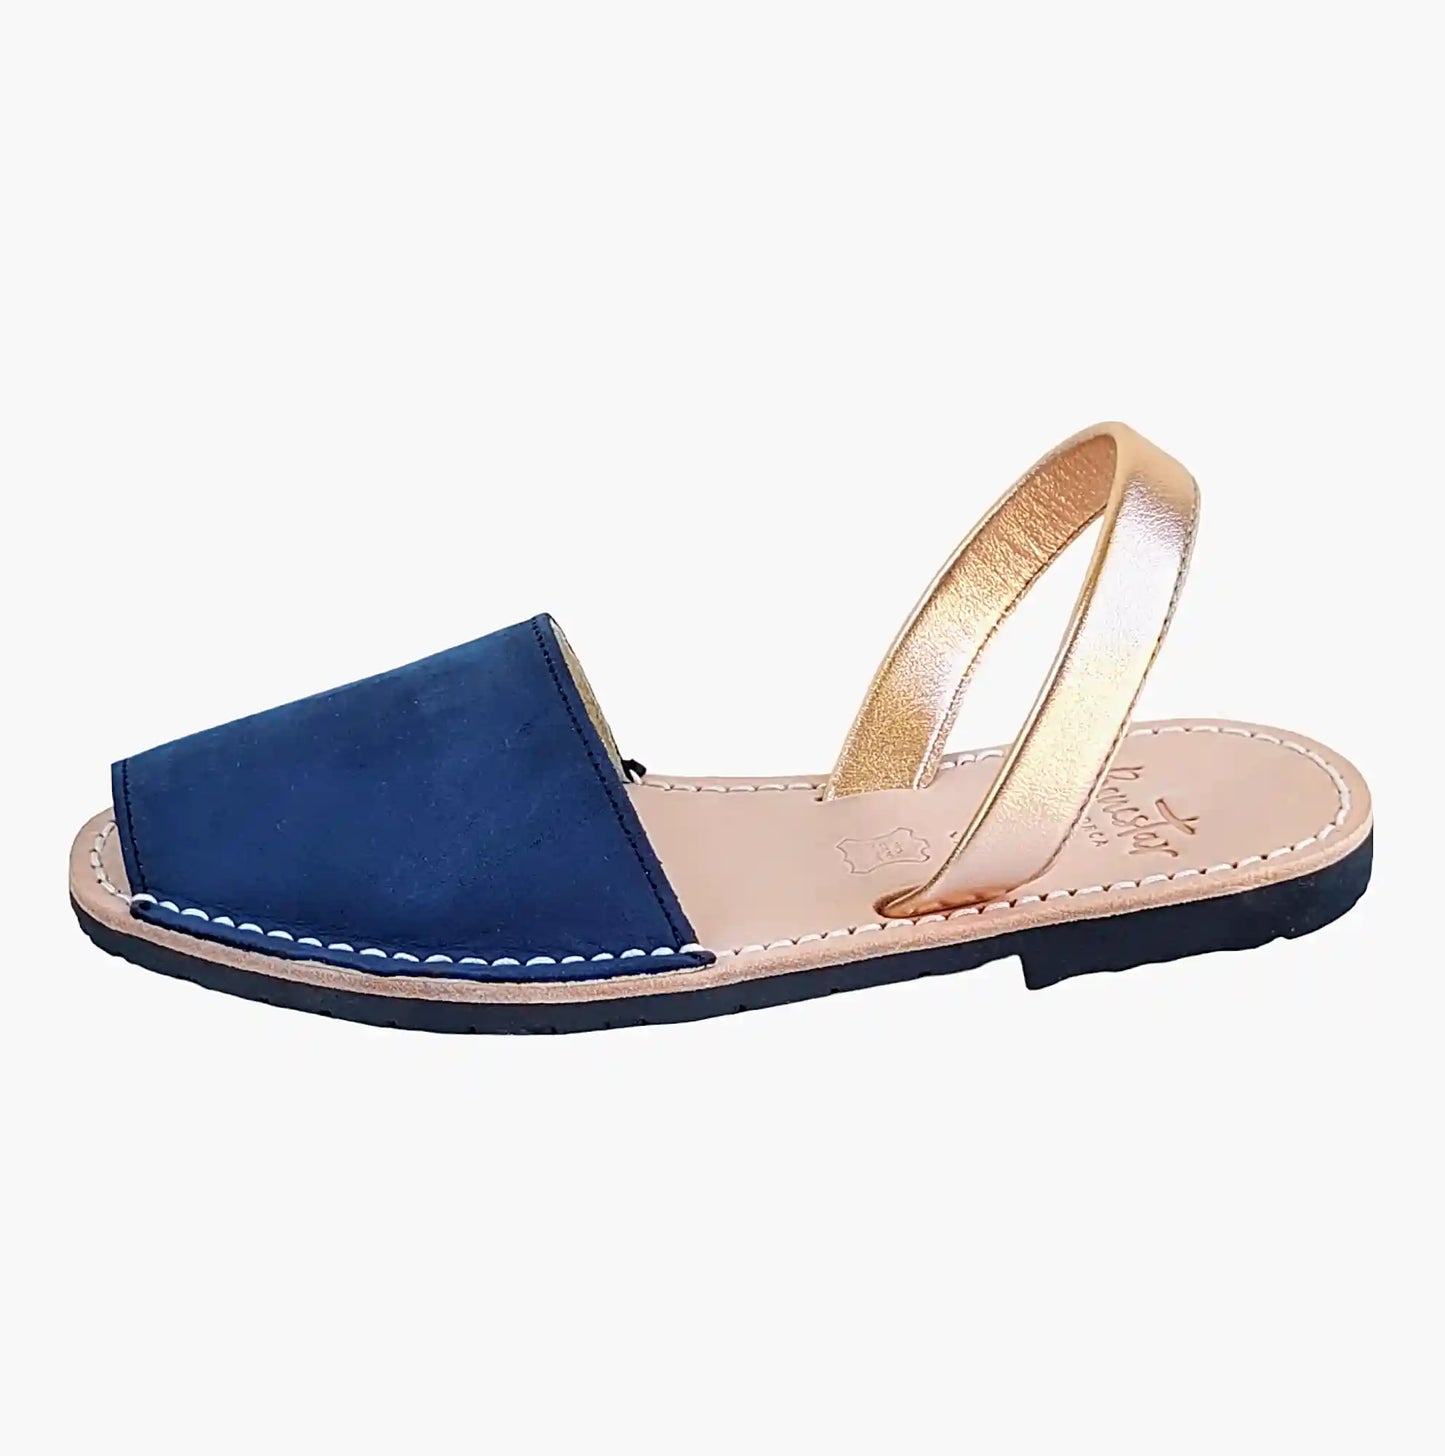 Avarcas-Navy-Rose-Gold-Sandals-side-view